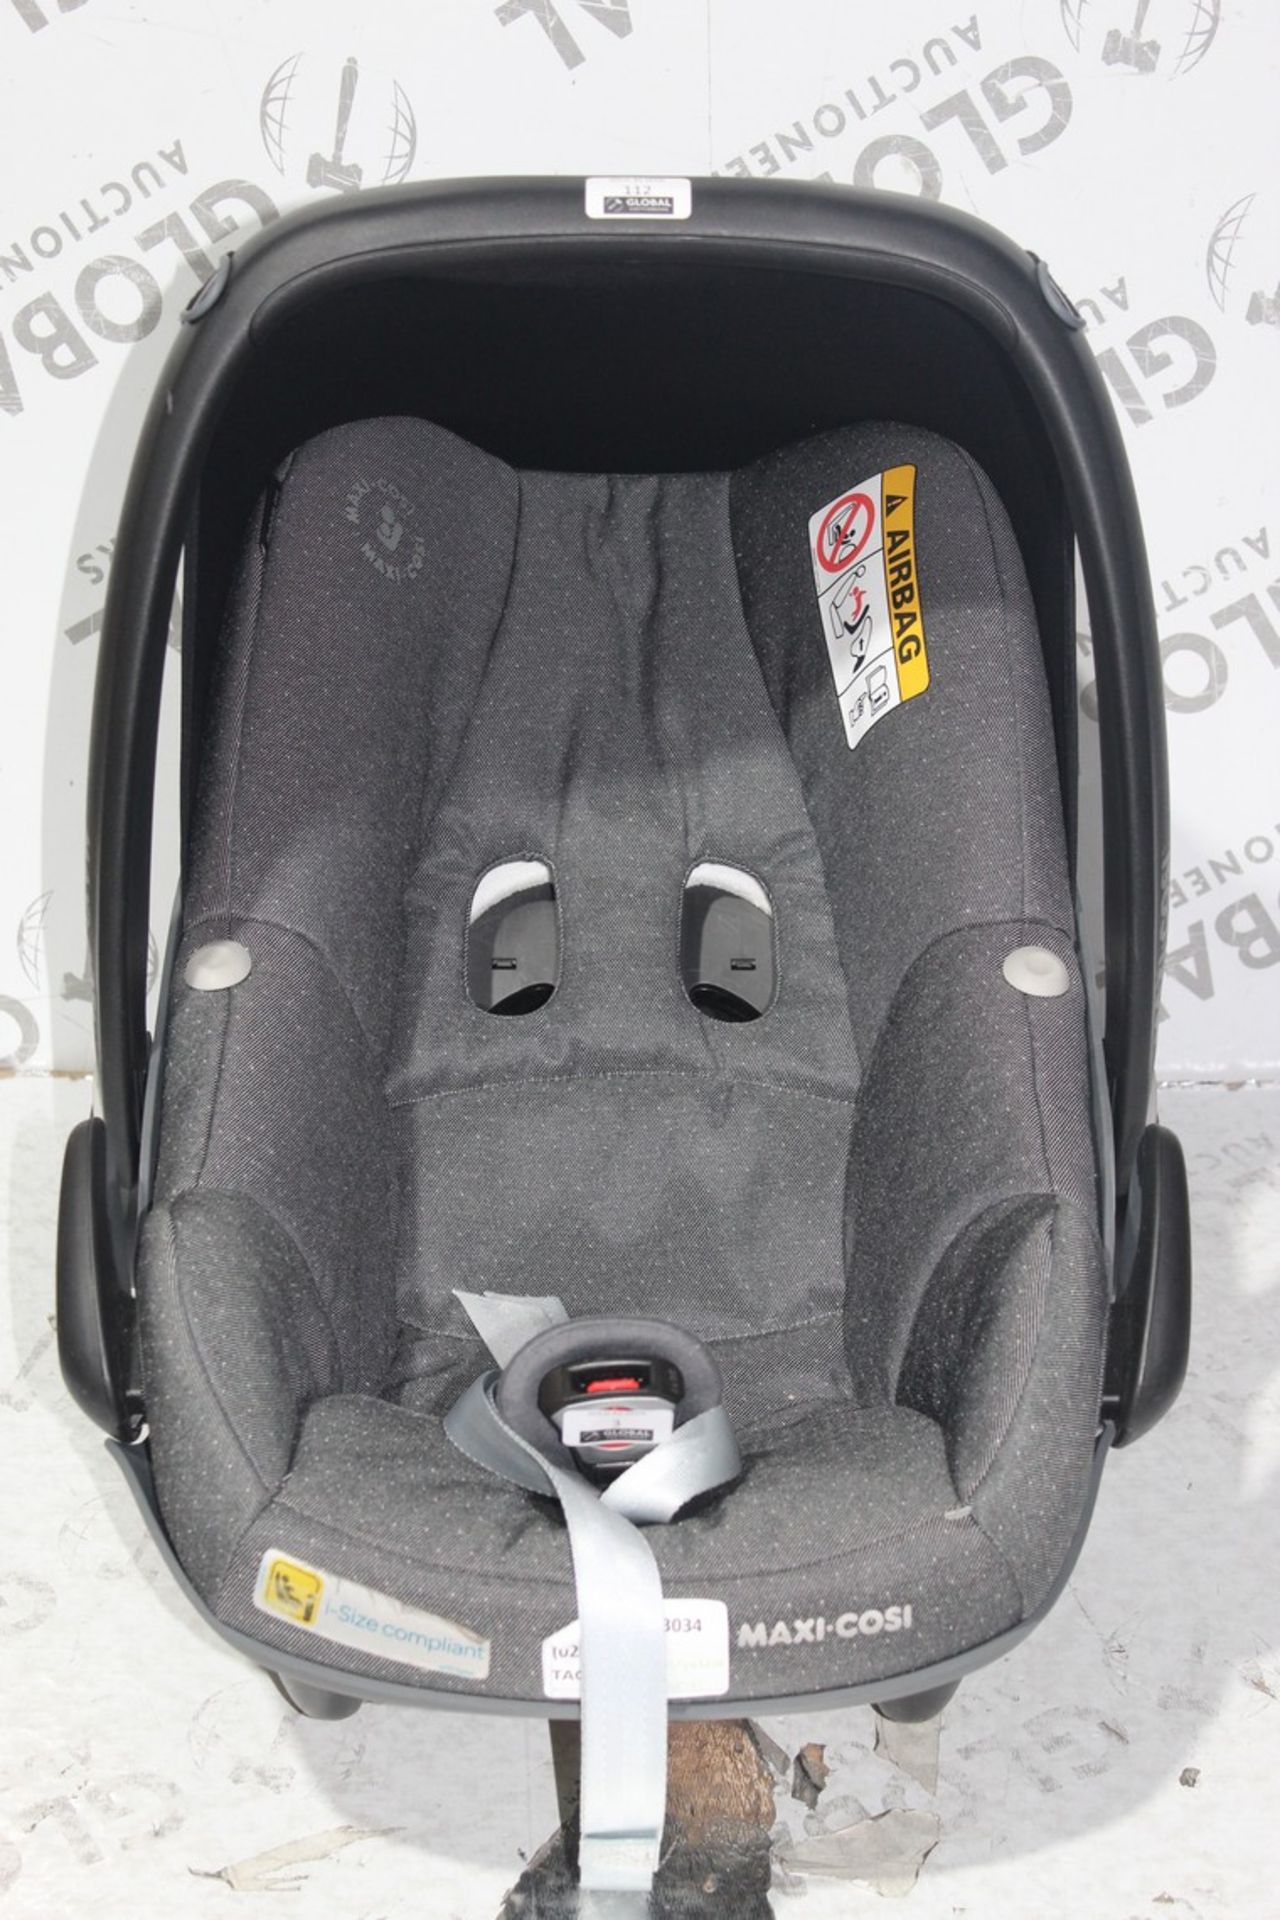 Maxi Cosi Pebble Pro Newborn In Car Safety Seat RRP £250 (RET00964654) (Appraisals Available)